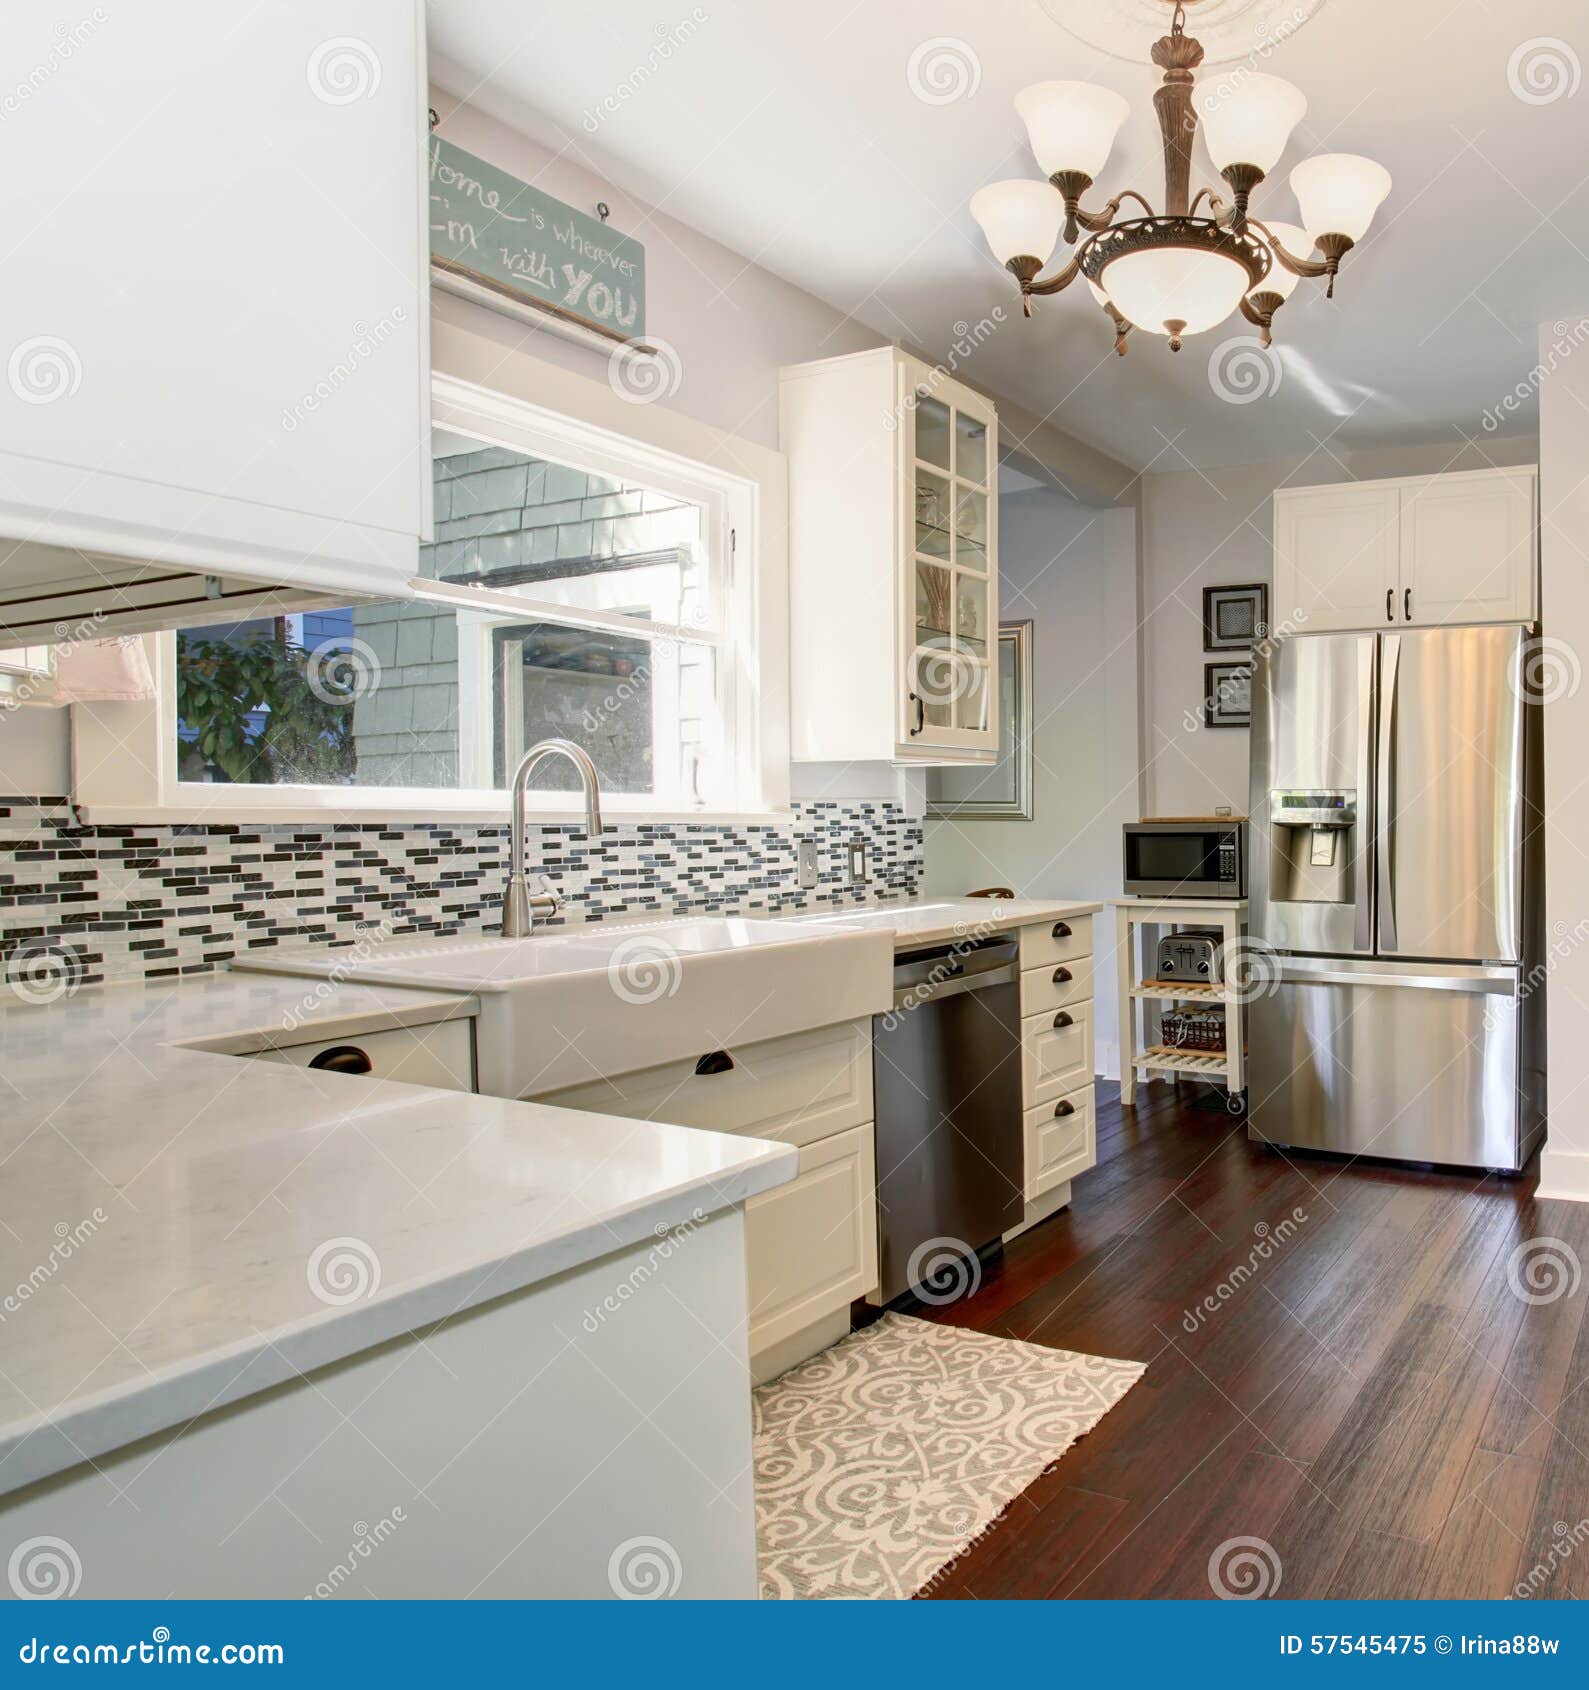 State Of The Art Kitchen With Stainless Steel Appliances Stock